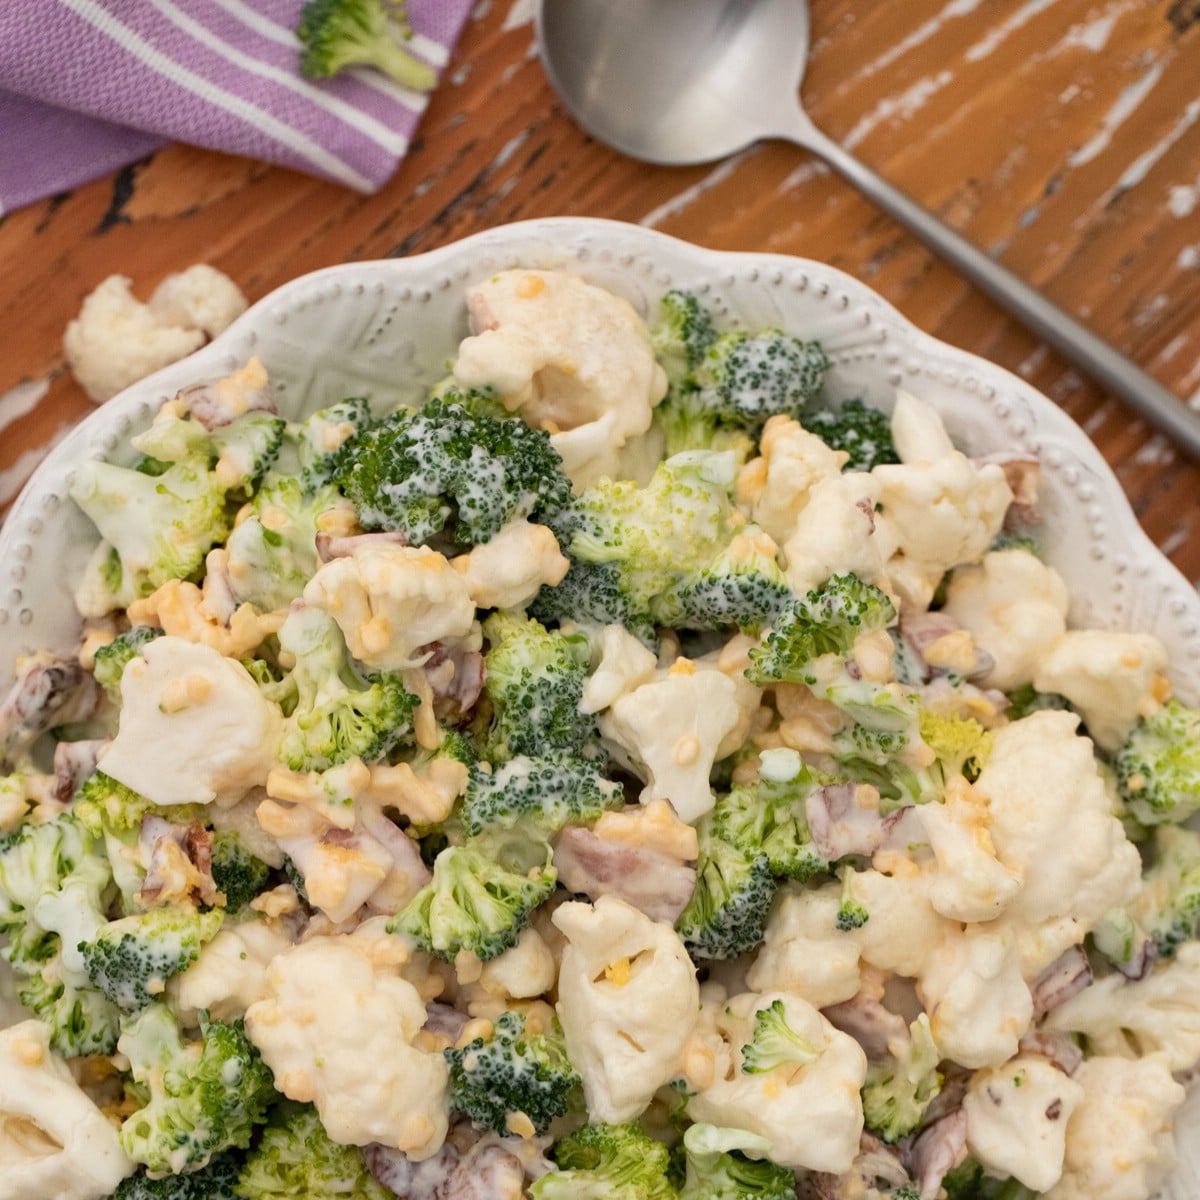 Broccoli salad in a white bowl on wood table